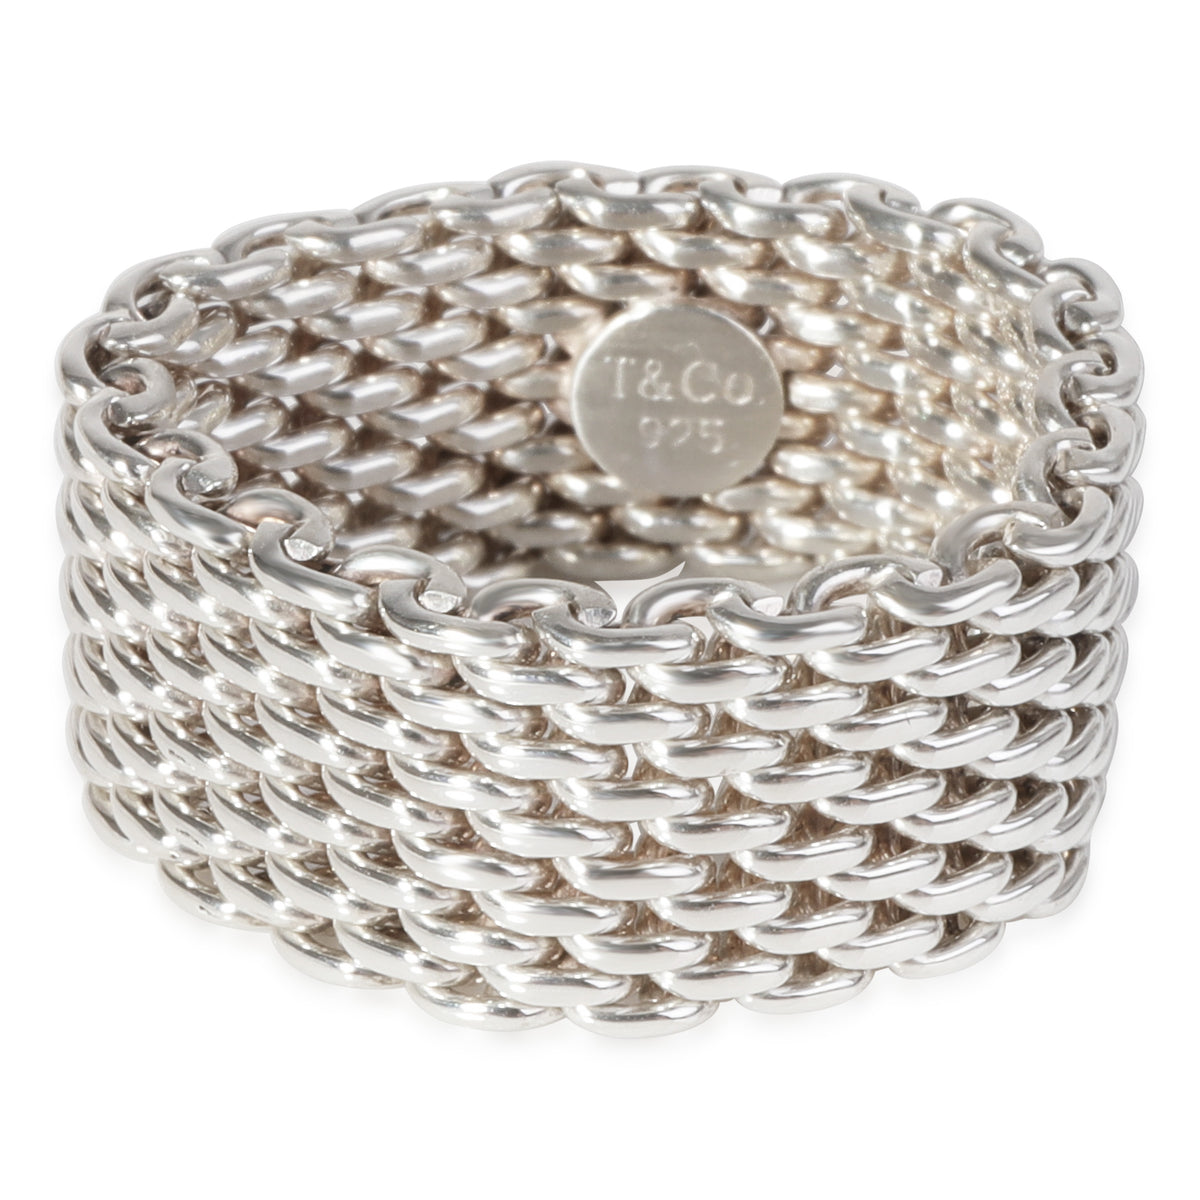 Tiffany & Co. Somerset Mesh Ring in Sterling Silver